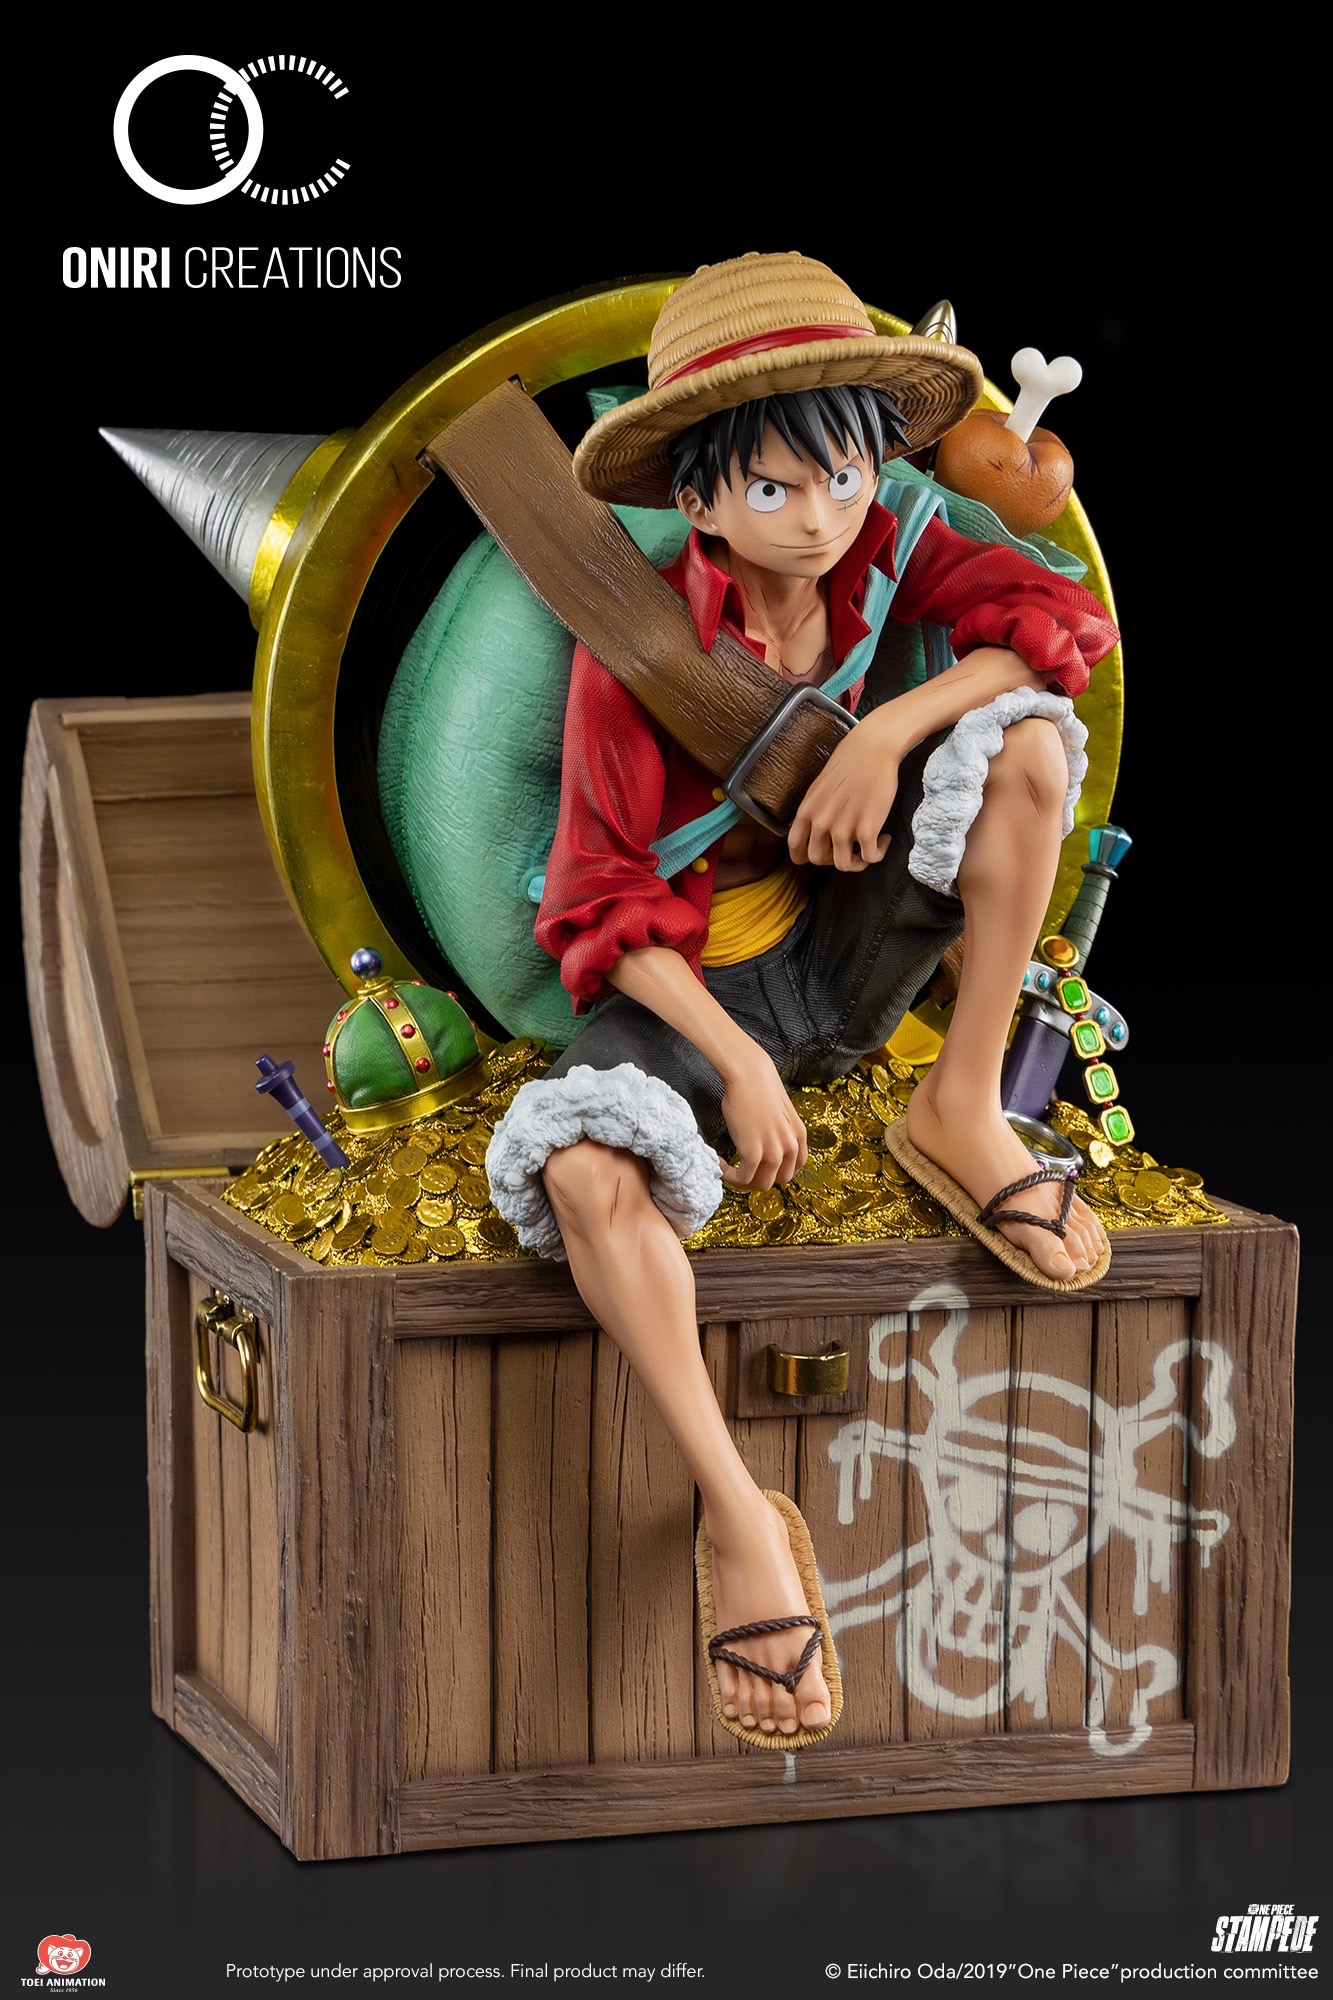 Monkey D. Luffy ลูฟี่ by Oniri Creations [[SOLD OUT]]